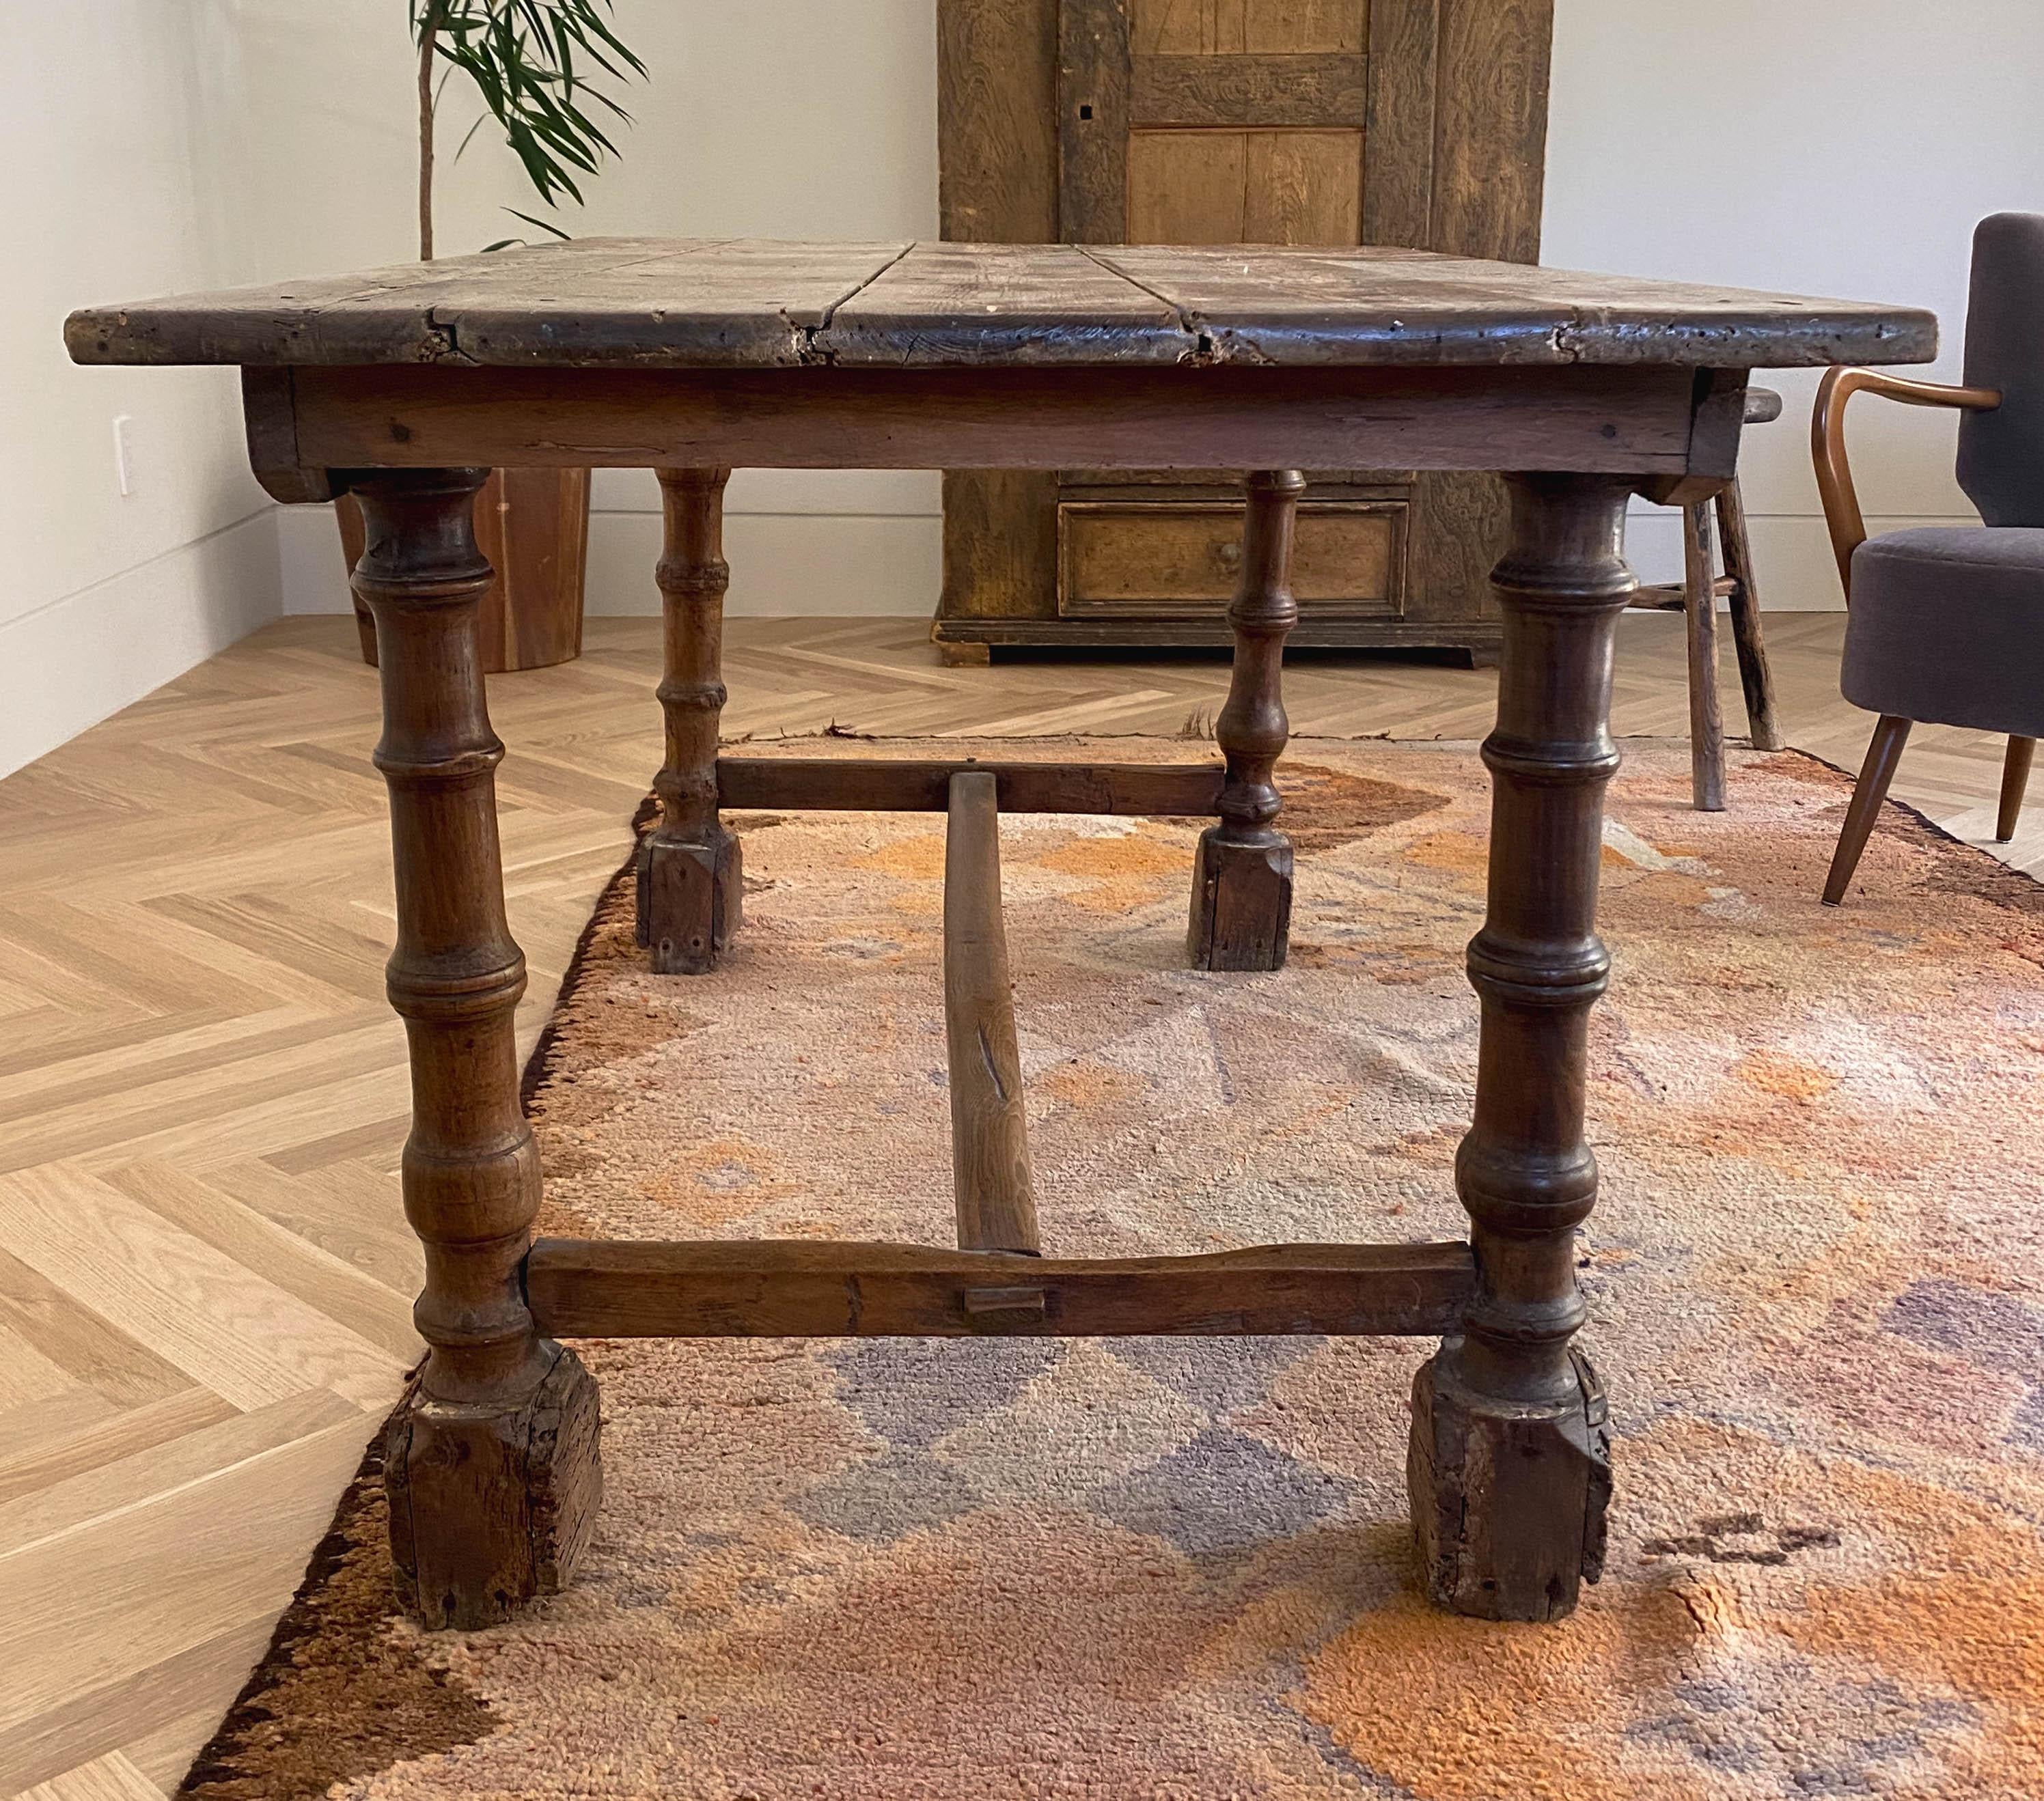 Monumental, rustic 19th century pine table with robust leg detailing and beautiful patina ideal for console, table, desk or small dining table.